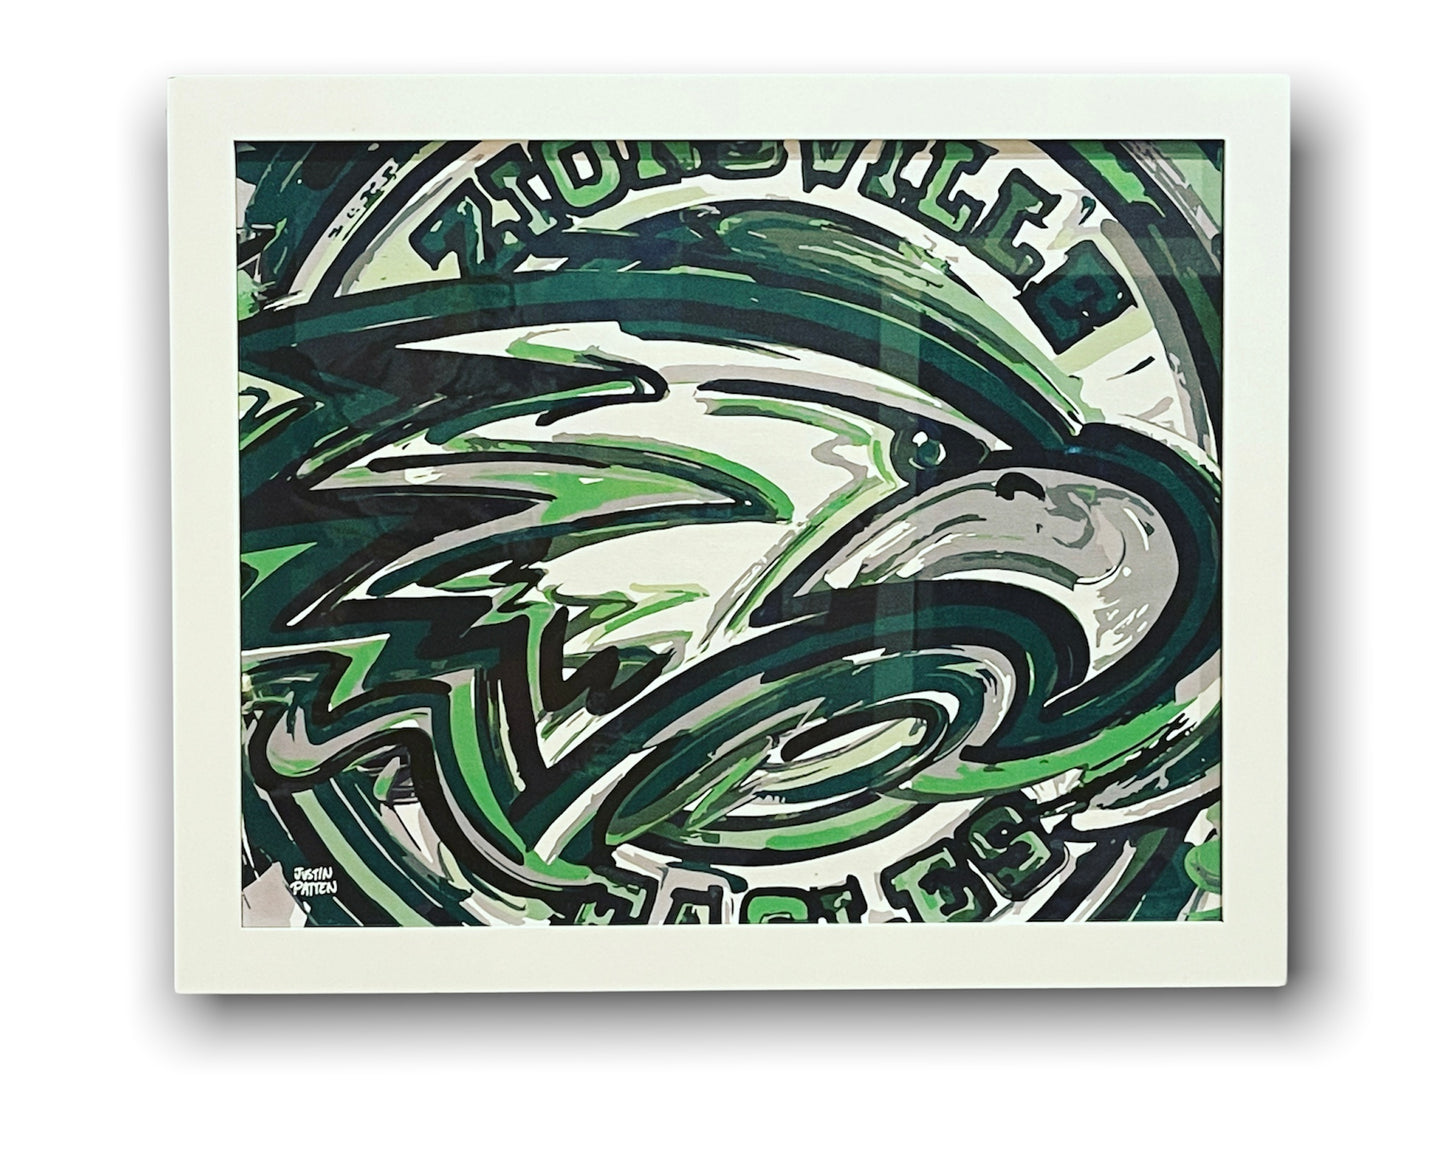 Zionsville 16" x 20" Eagle Print on Canvas by Justin Patten